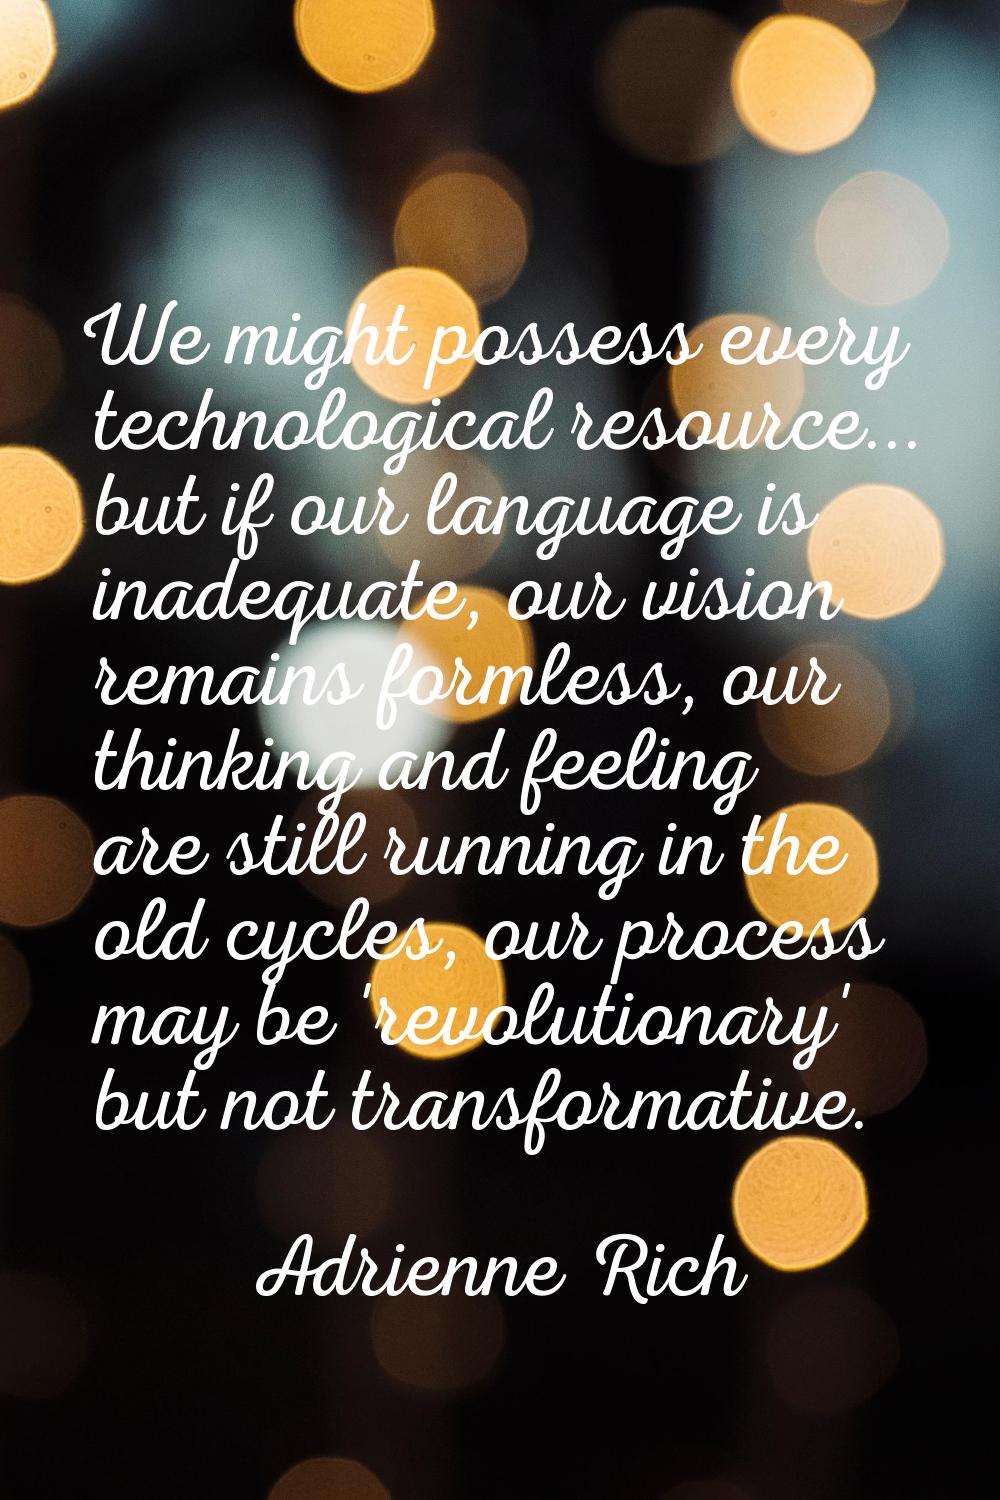 We might possess every technological resource... but if our language is inadequate, our vision rema